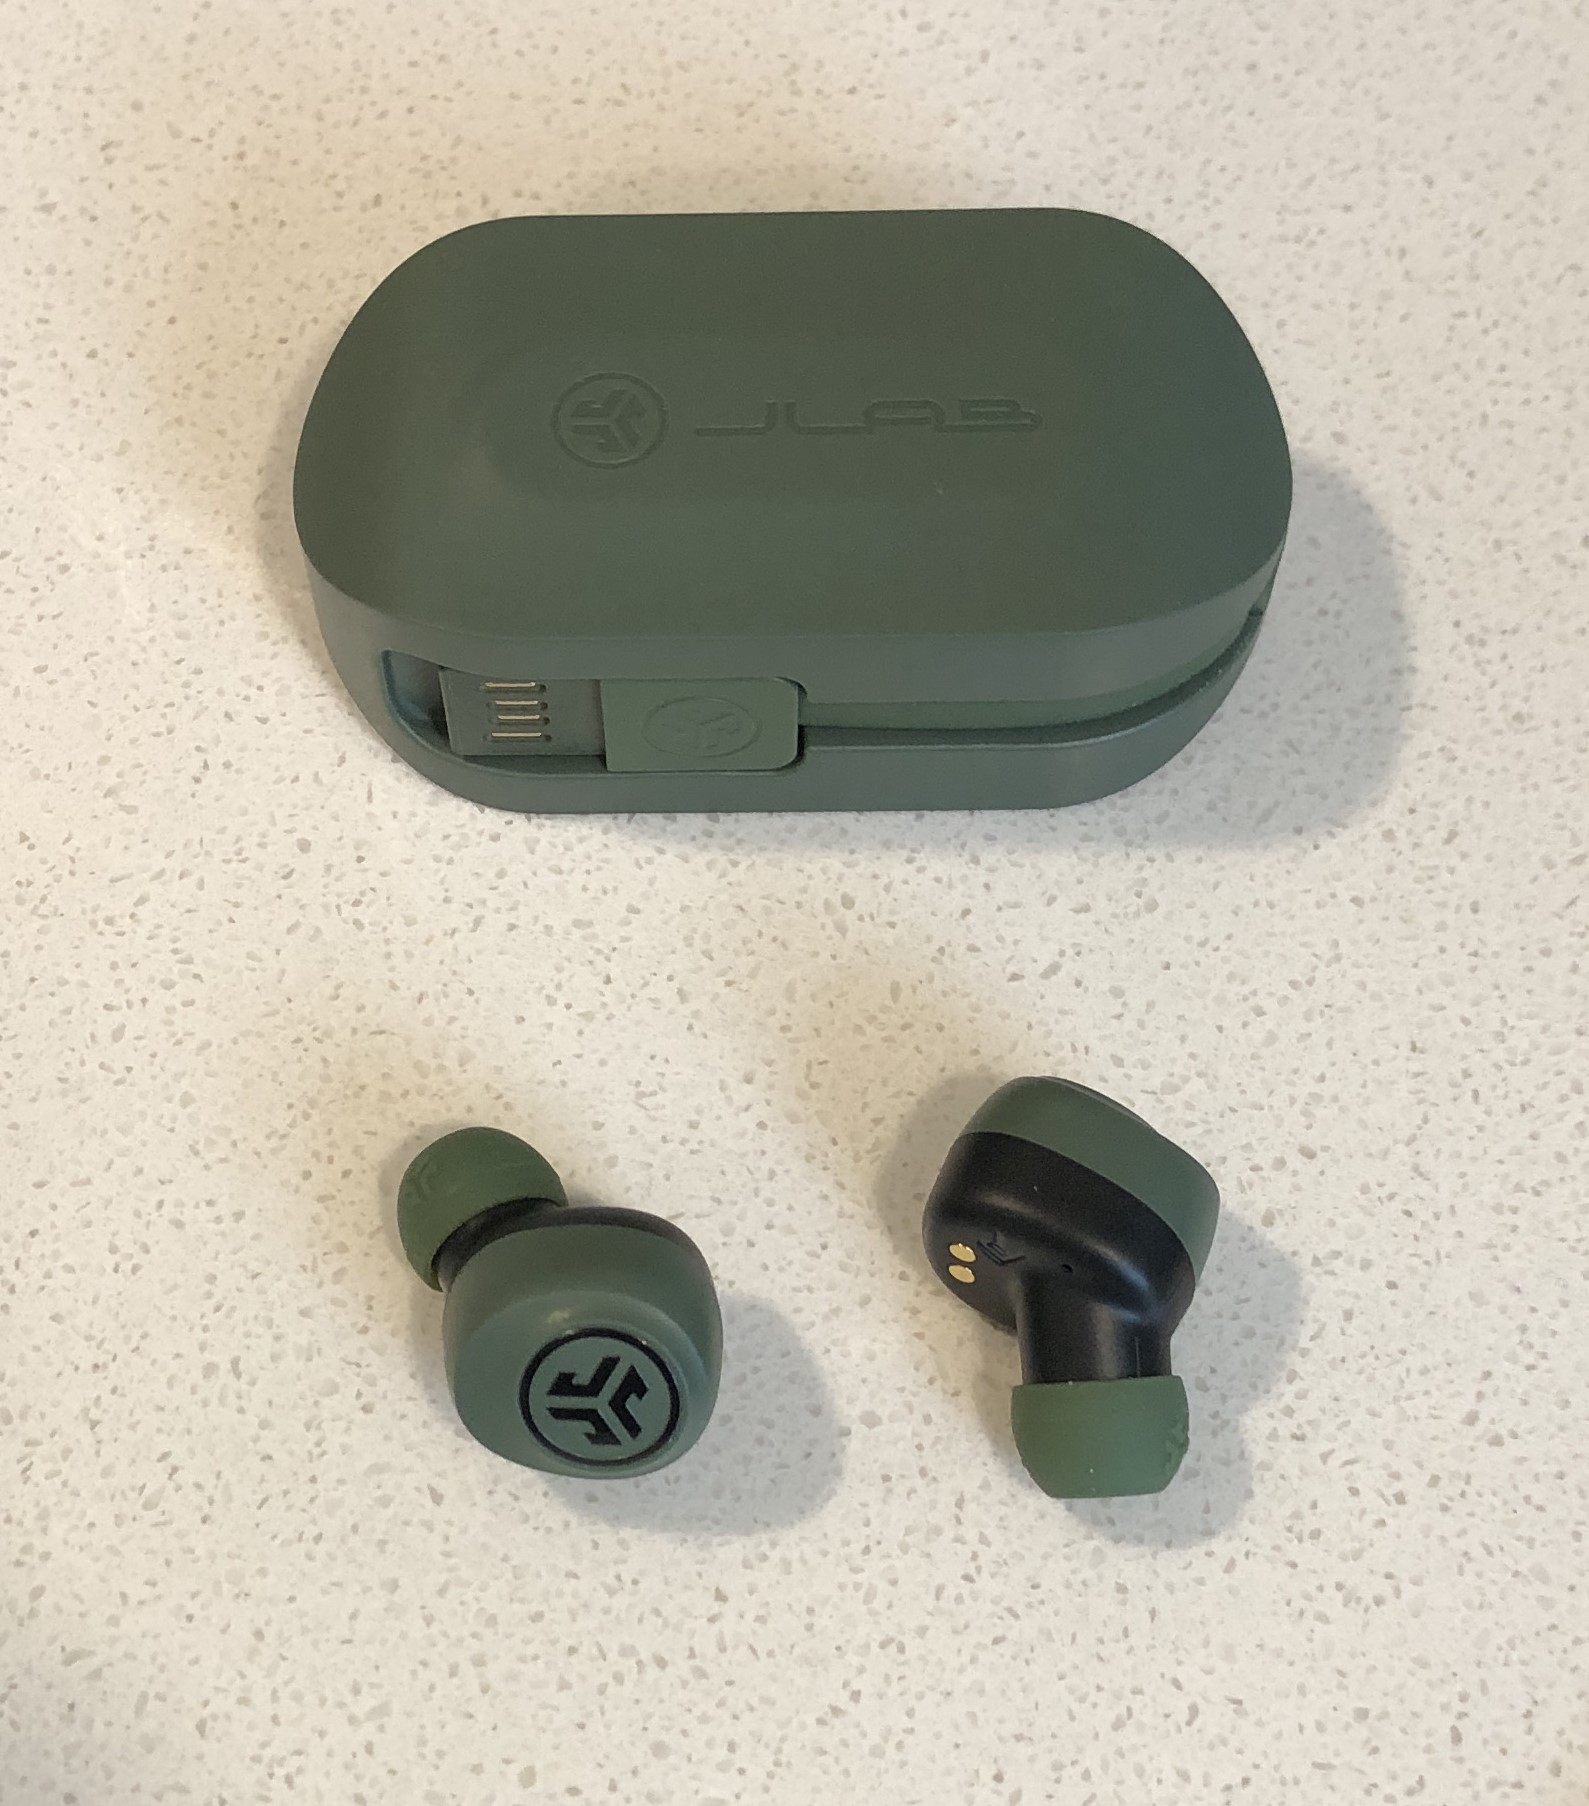 JLab GO Air case and earbuds